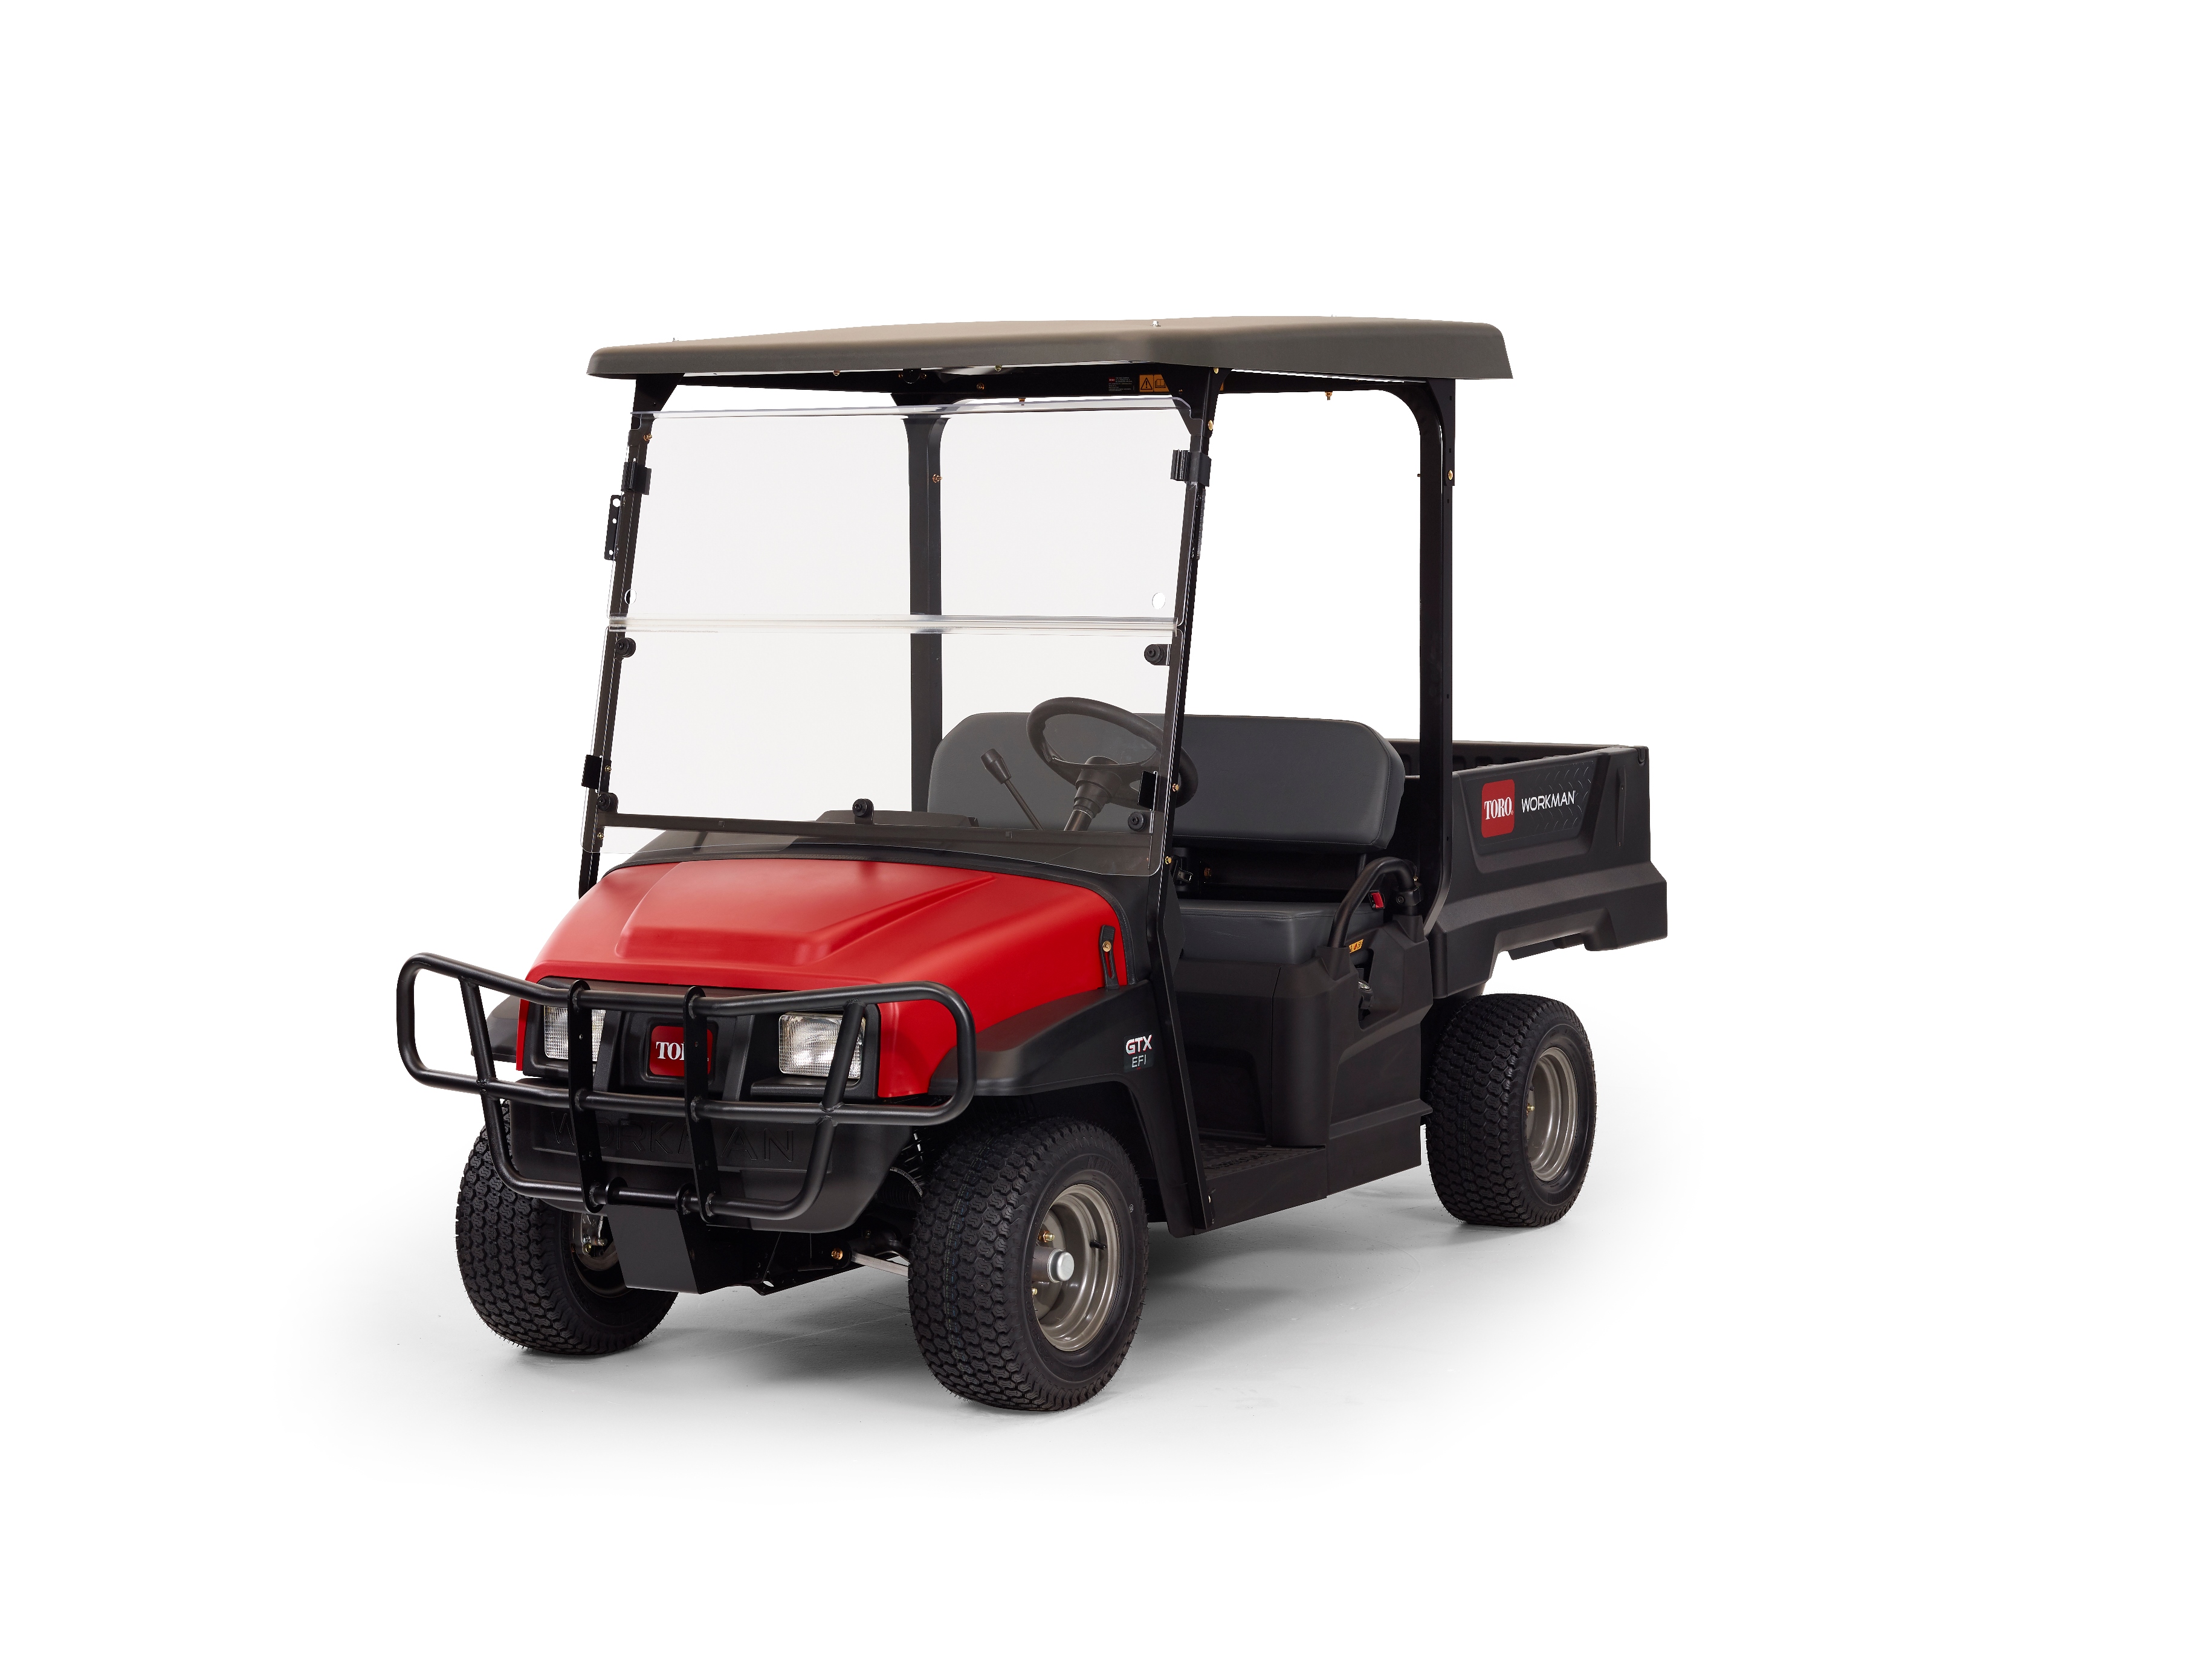 Toro Enhances Workman® GTX Product Line with New EFI Model and Attachments